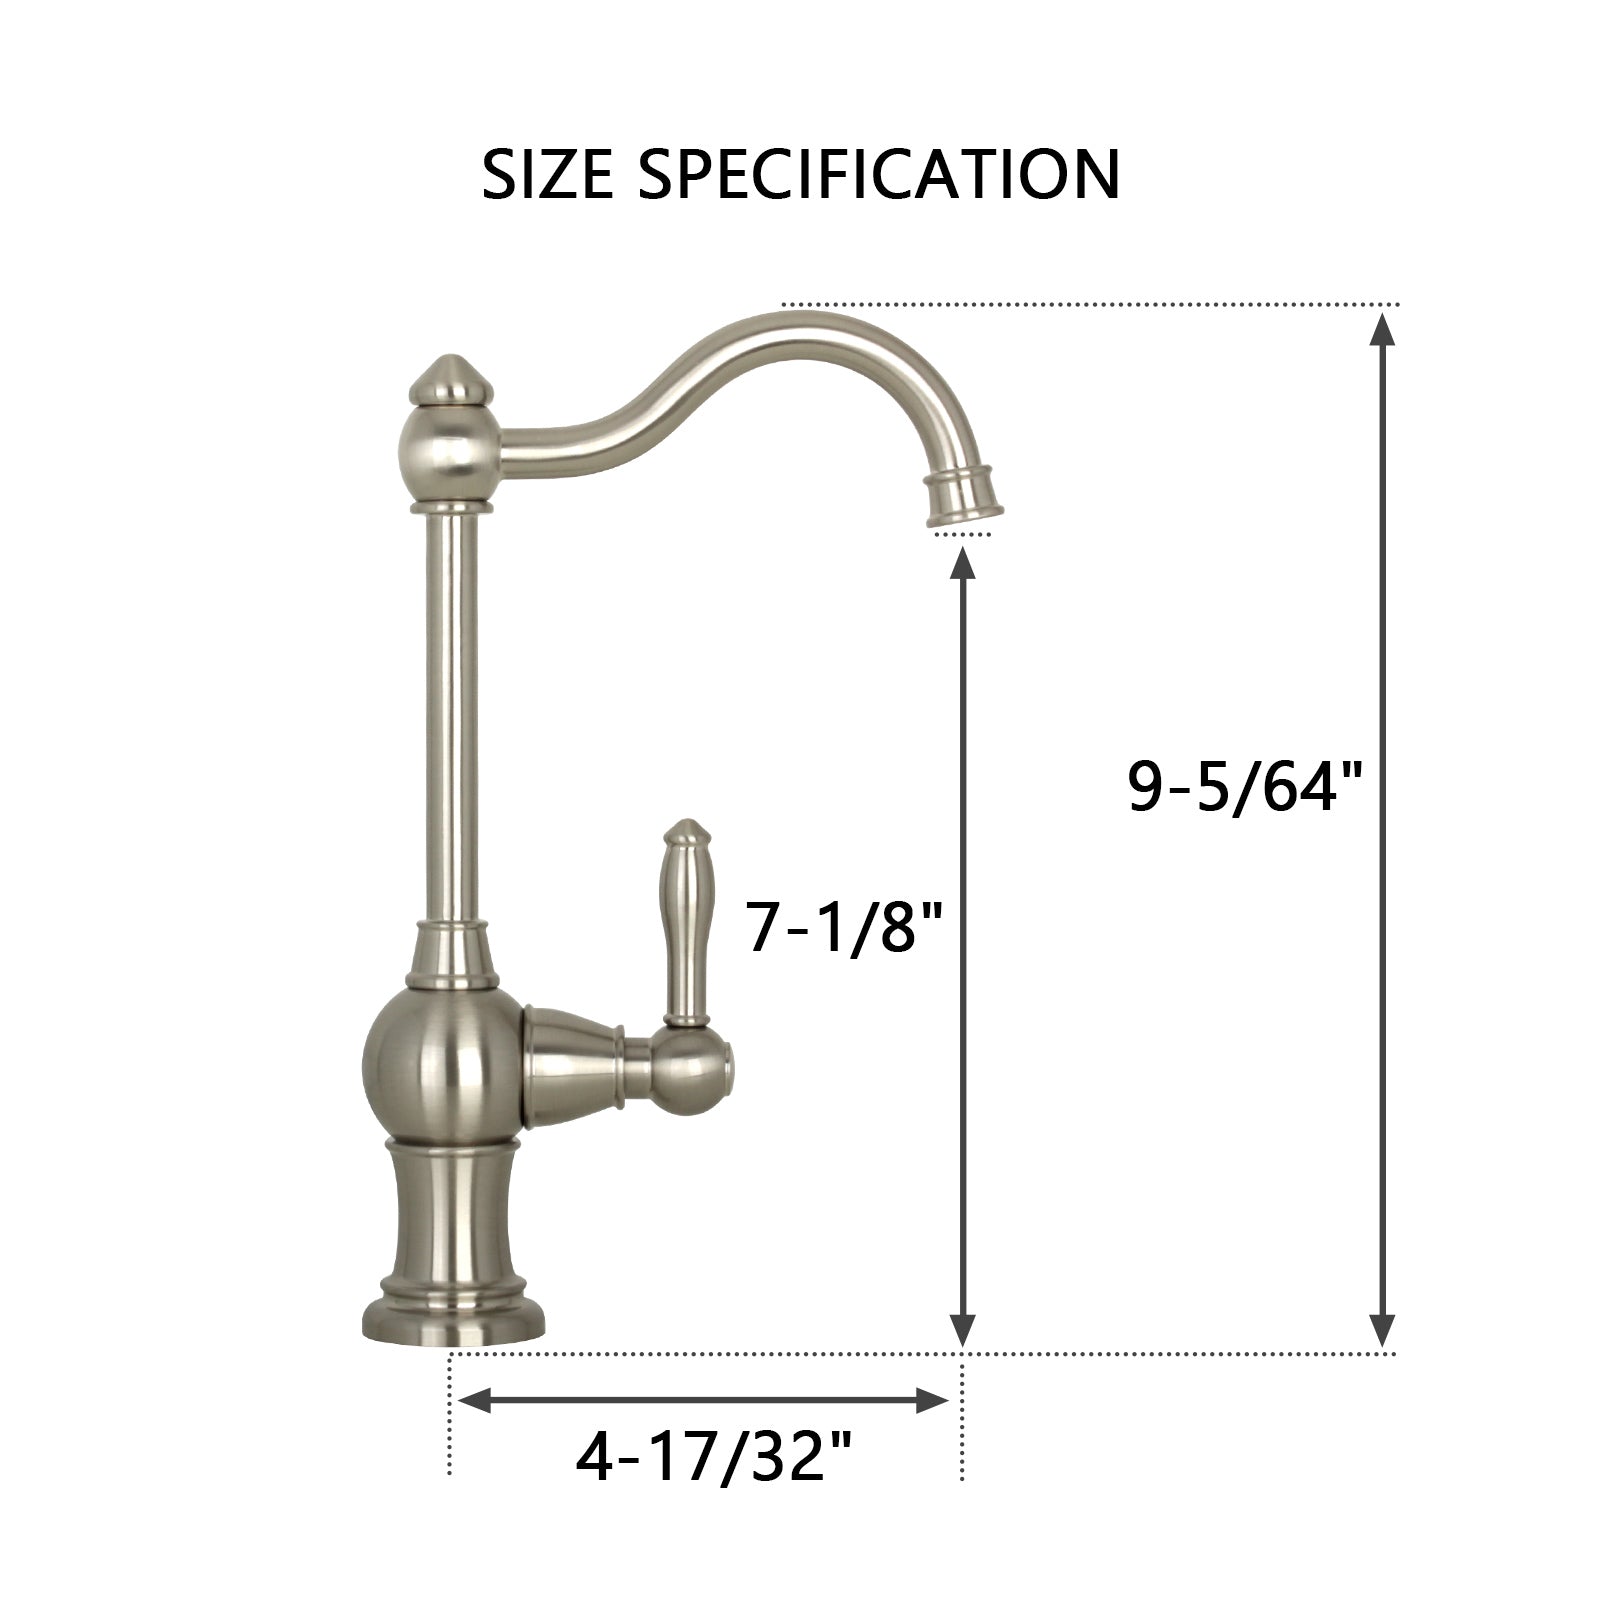 One-Handle Brushed Nickel Drinking Water Filter Faucet Water Purifier Faucet - AK97718-BN